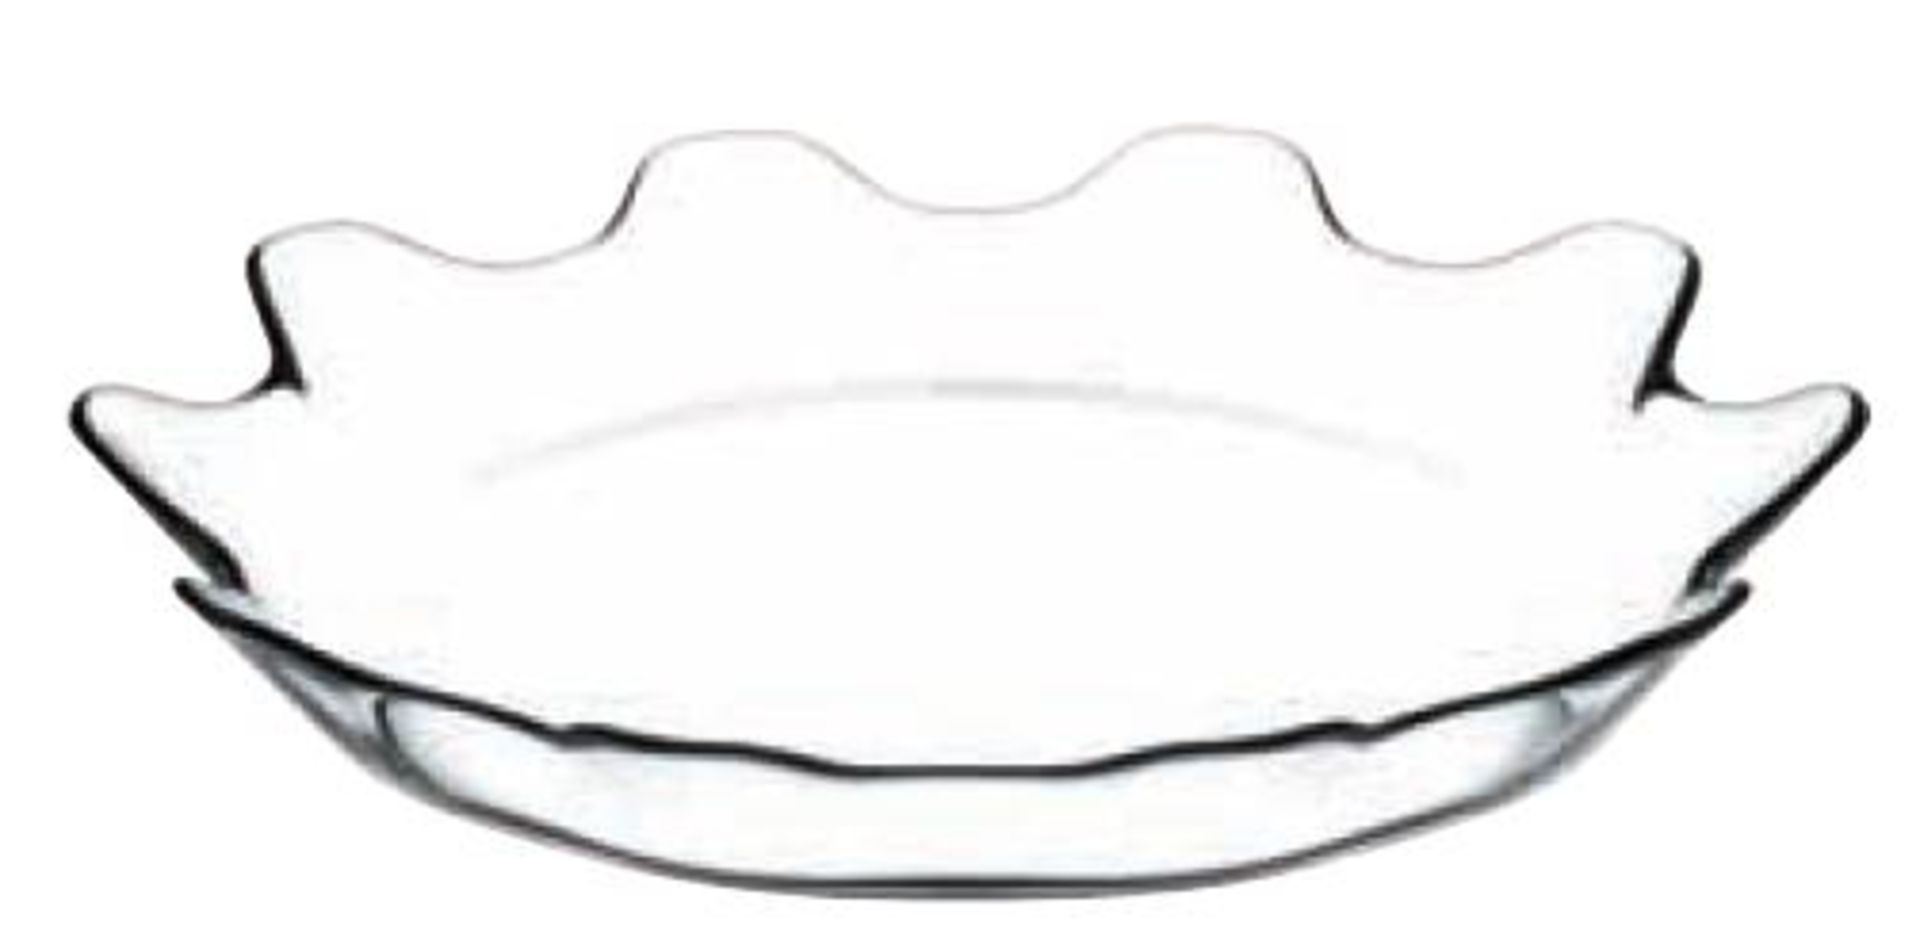 V Brand New Patisserie Round Service Plate X 2 Bid price to be multiplied by Two